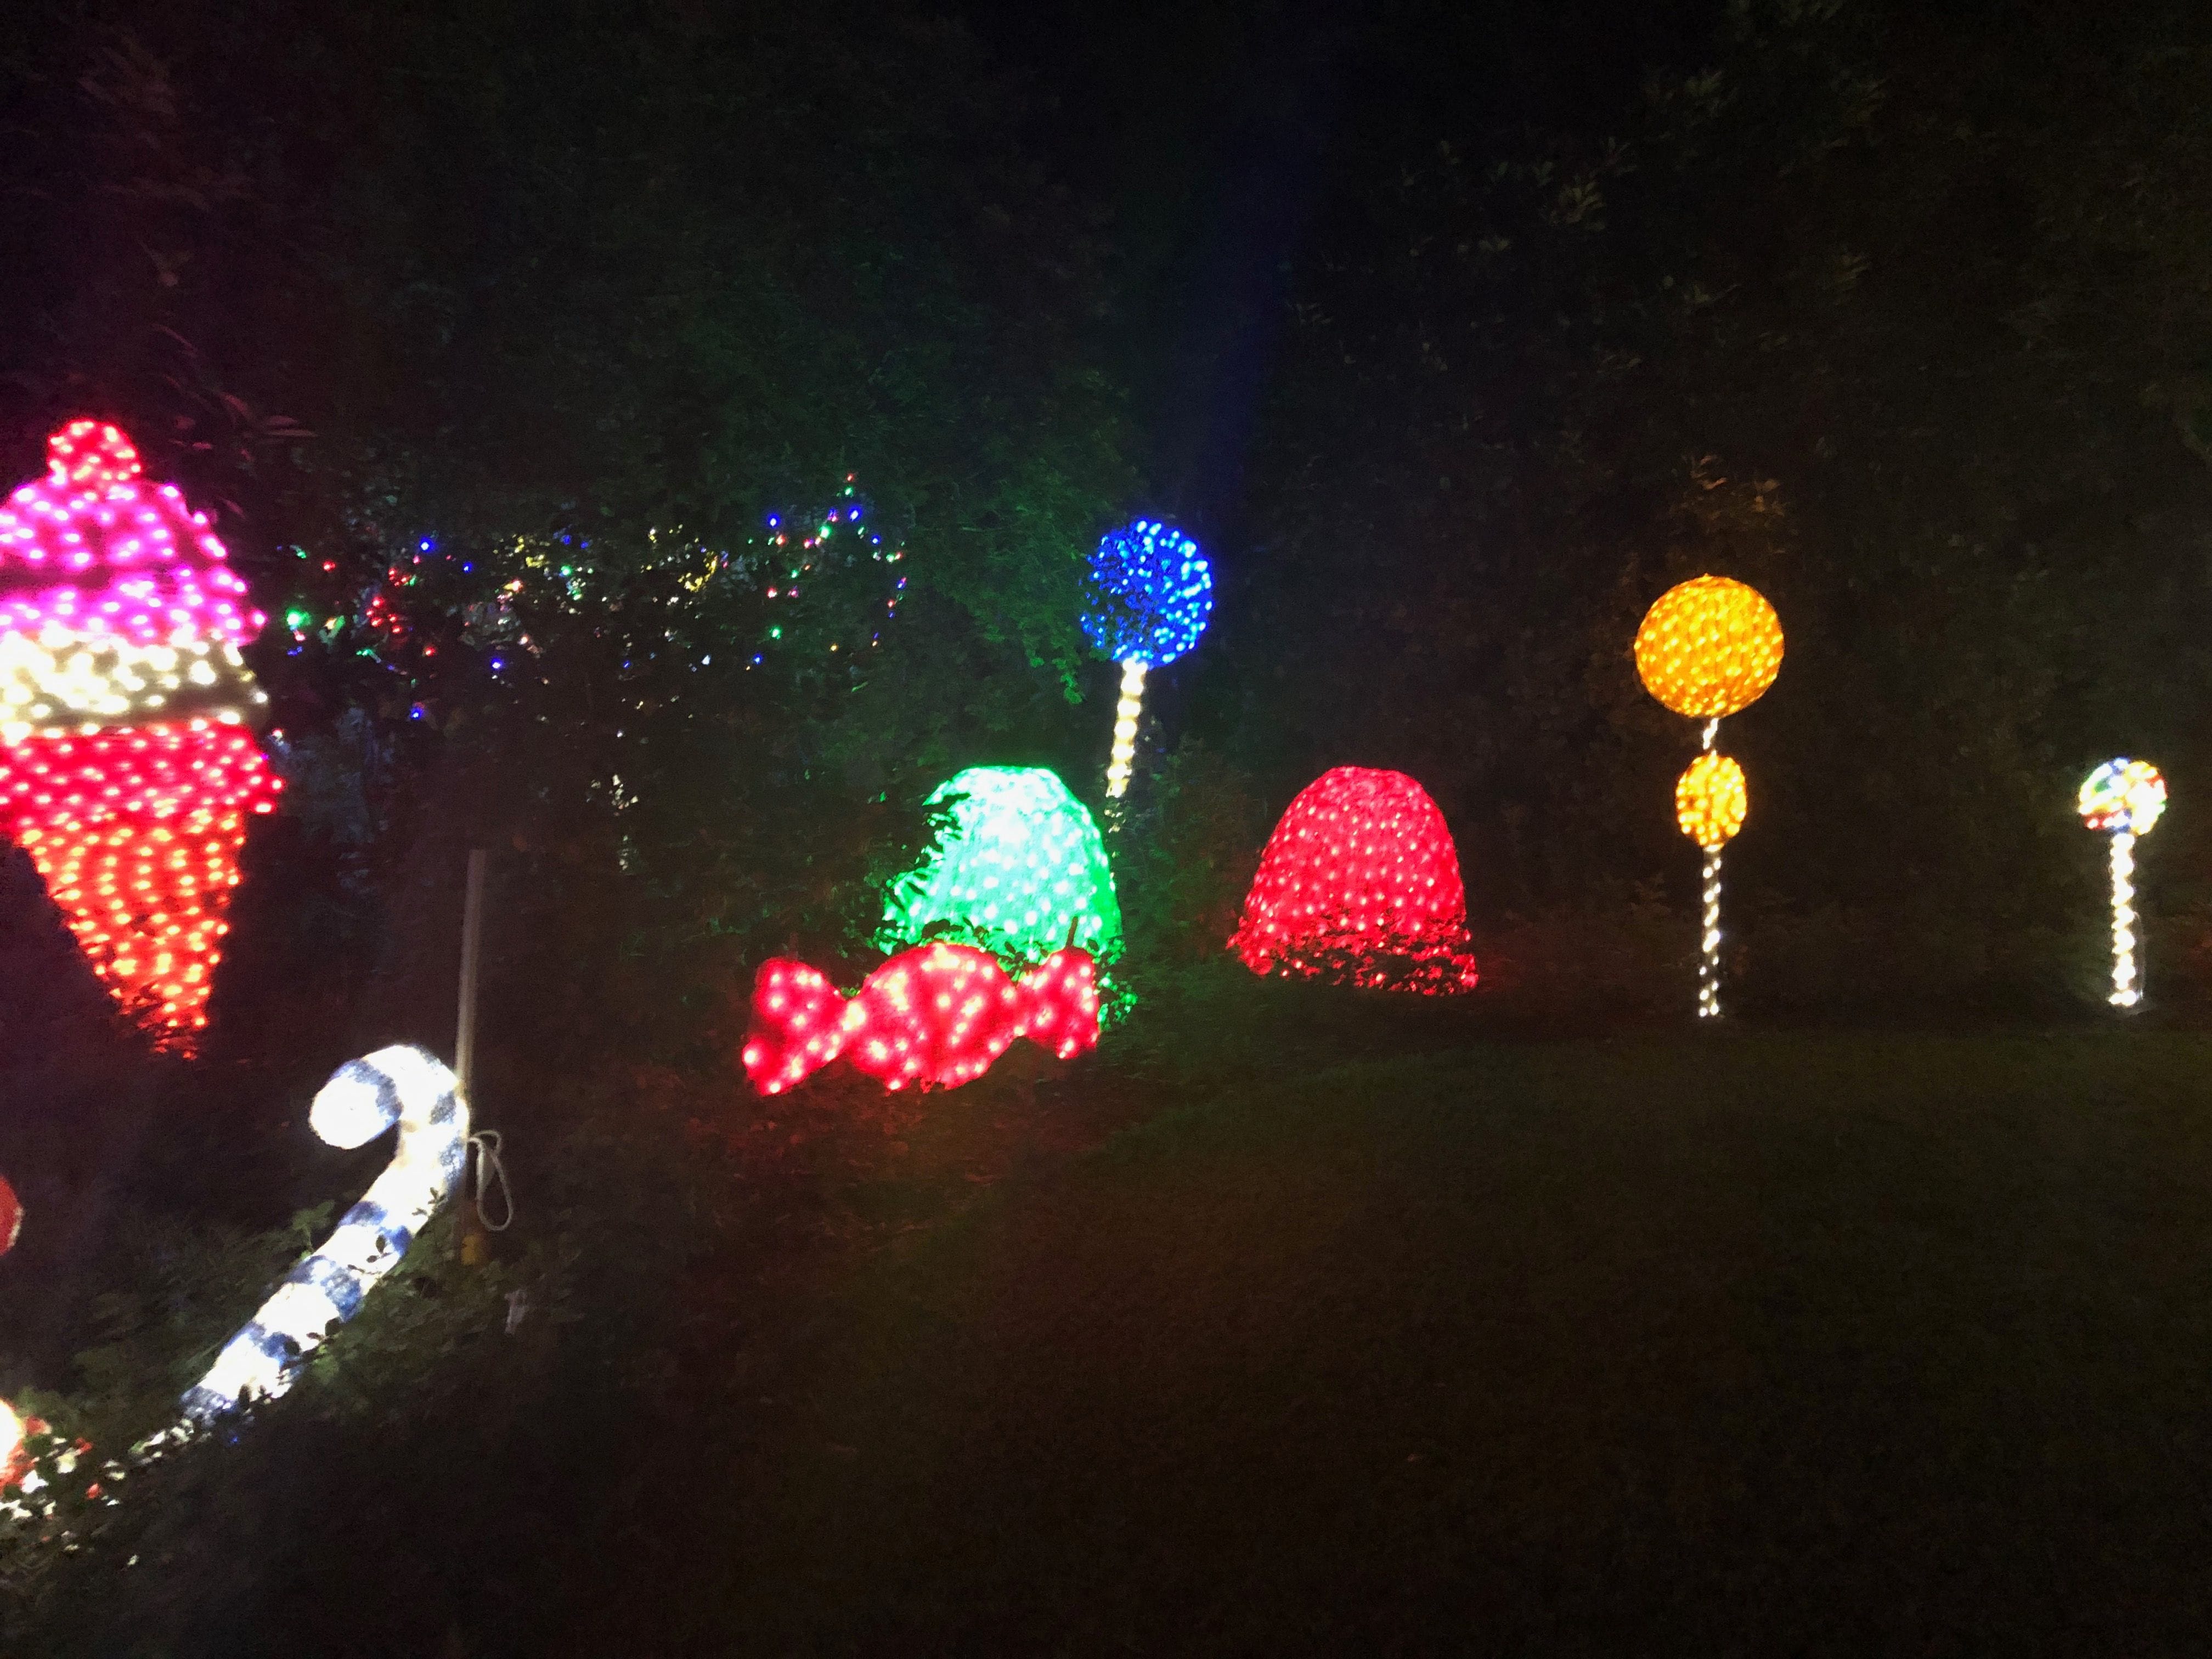 Hunter Valley Christmas Lights Spectacular 2019 Image -5e9b6f90a8330